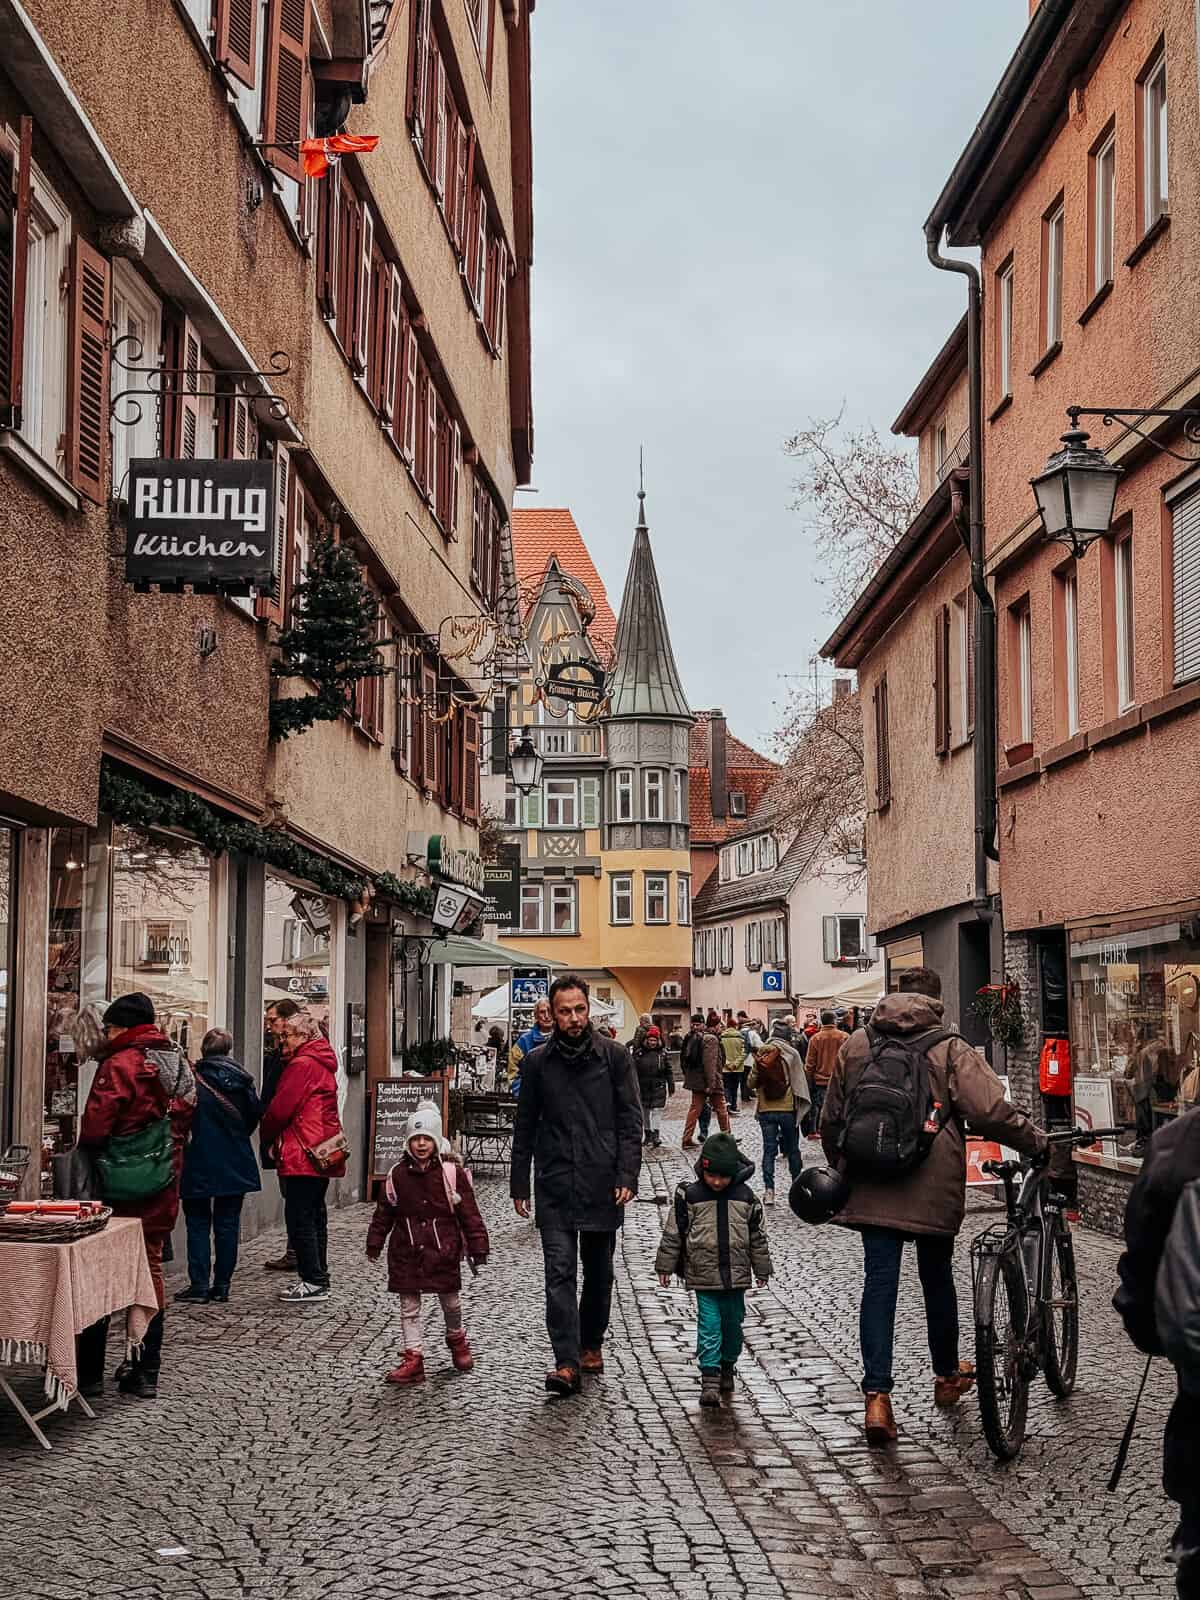 Residents and tourists walk through a cobblestone street in Tübingen, with colorful buildings, local shops like 'Rilling küchen', and festive street decorations visible